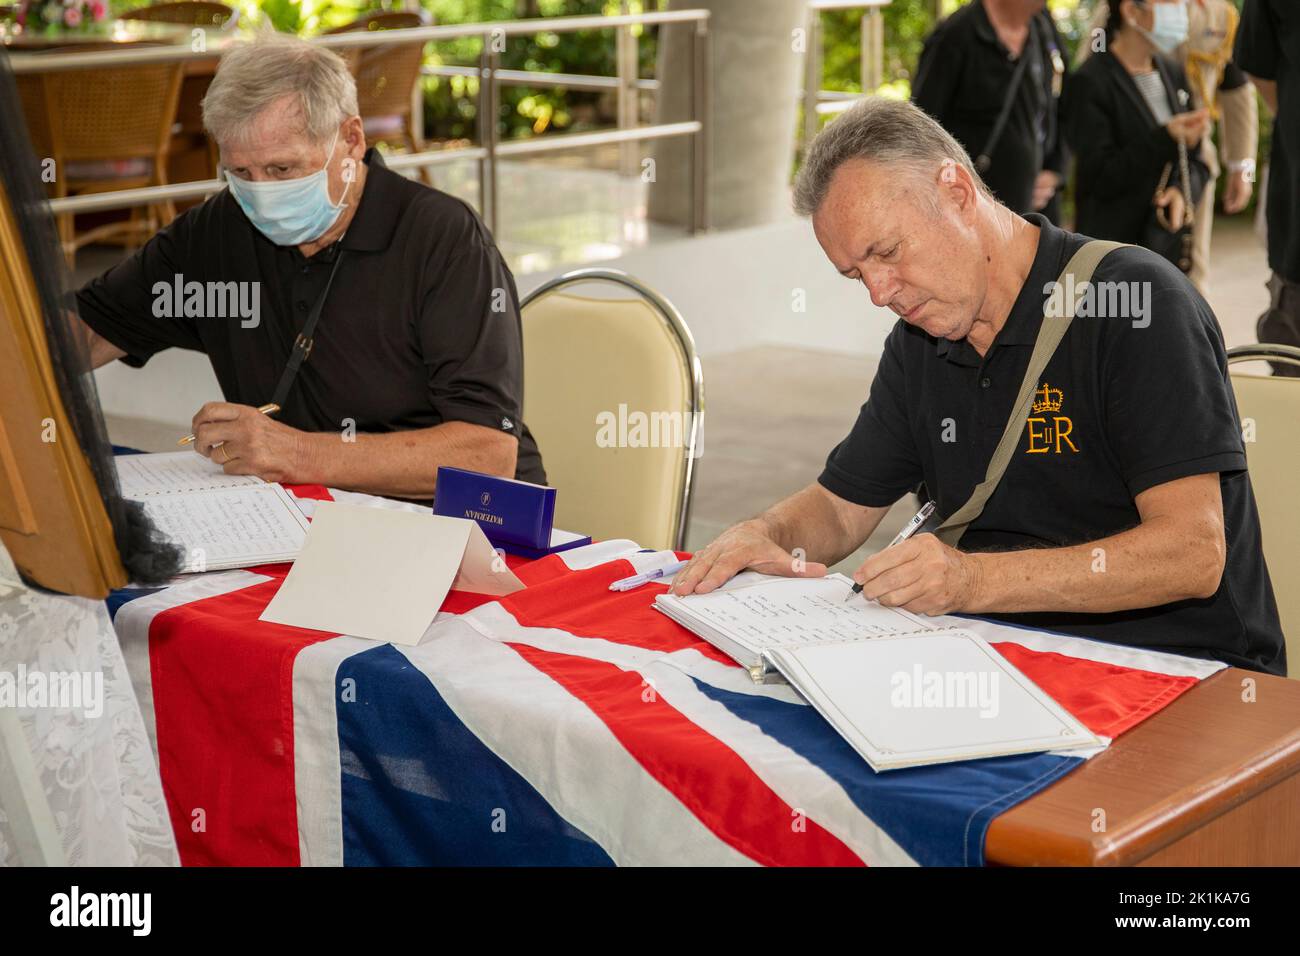 Pattaya, Thailand. 19th Sep, 2022. Participants sign the condolence book during a special commemoration service marking the death of Her Late Majesty Queen Elizabeth II at the Mahatai Convention Center Father Rays Foundation on September 19, 2022 in PATTAYA, THAILAND (Photo by Peter van der KloosterAlamy Live News) Credit: peter Van der Klooster/Alamy Live News Stock Photo